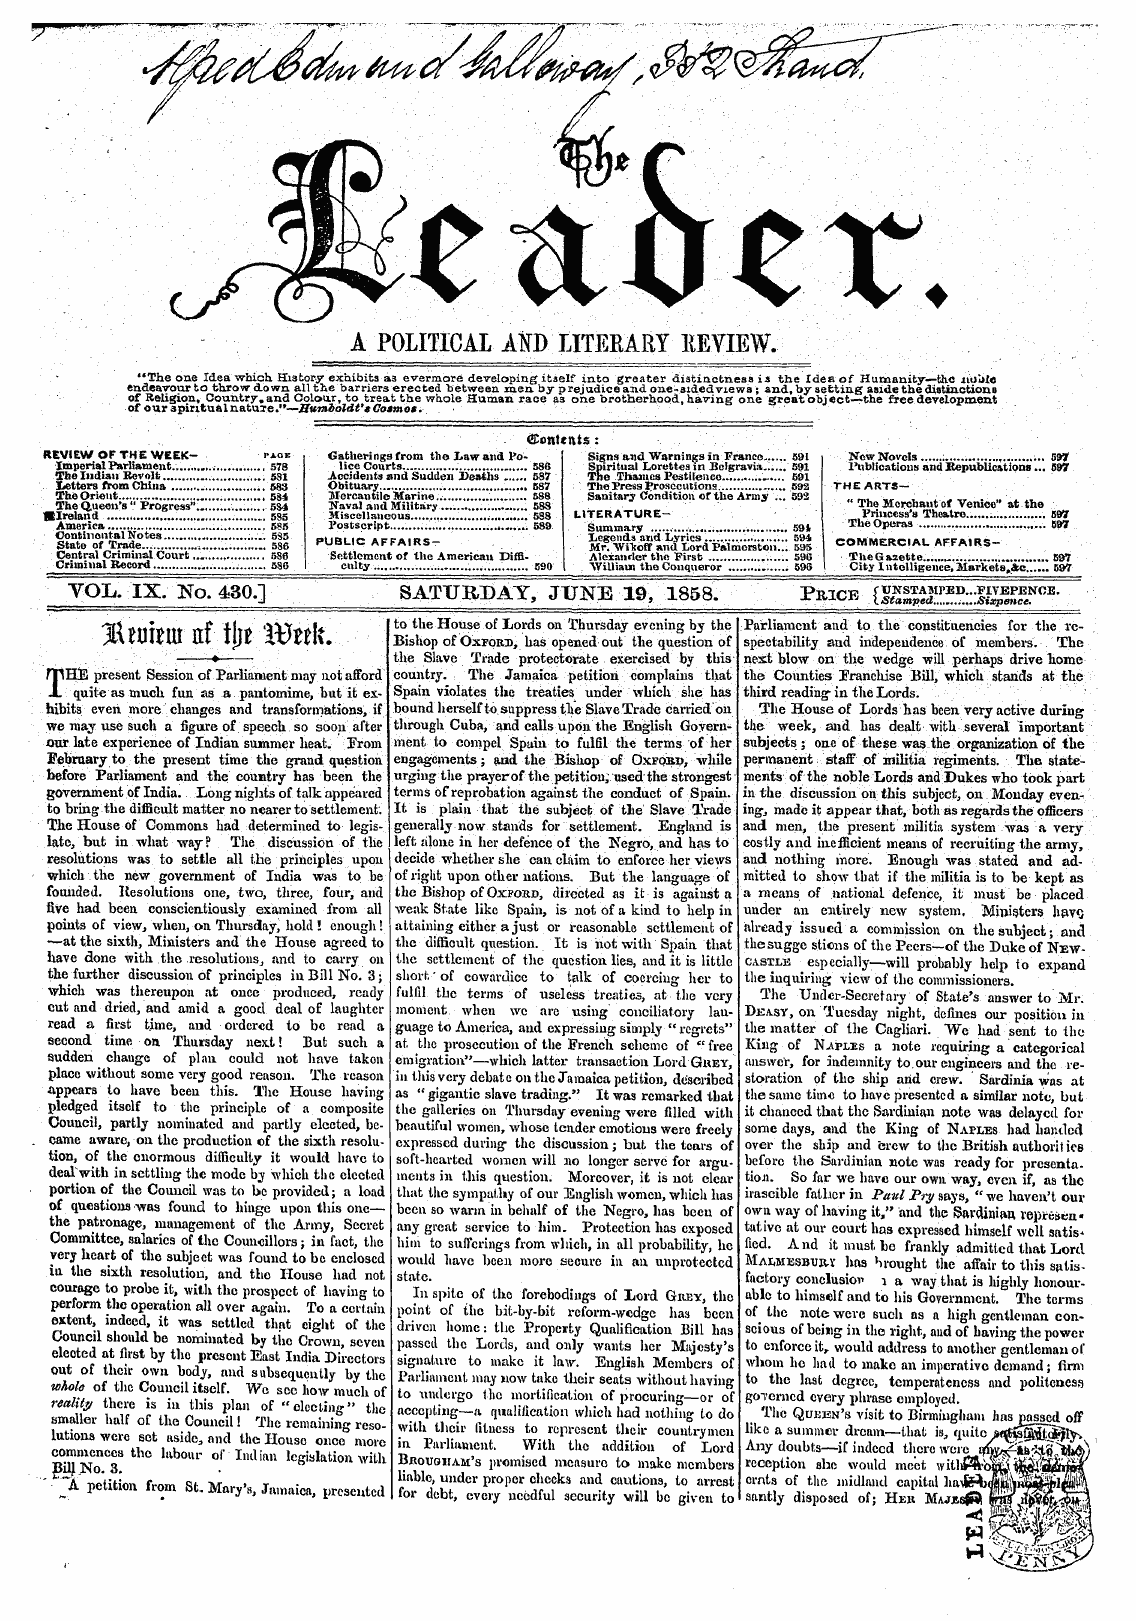 Leader (1850-1860): jS F Y, 2nd edition - A Political Ato Literary Review.